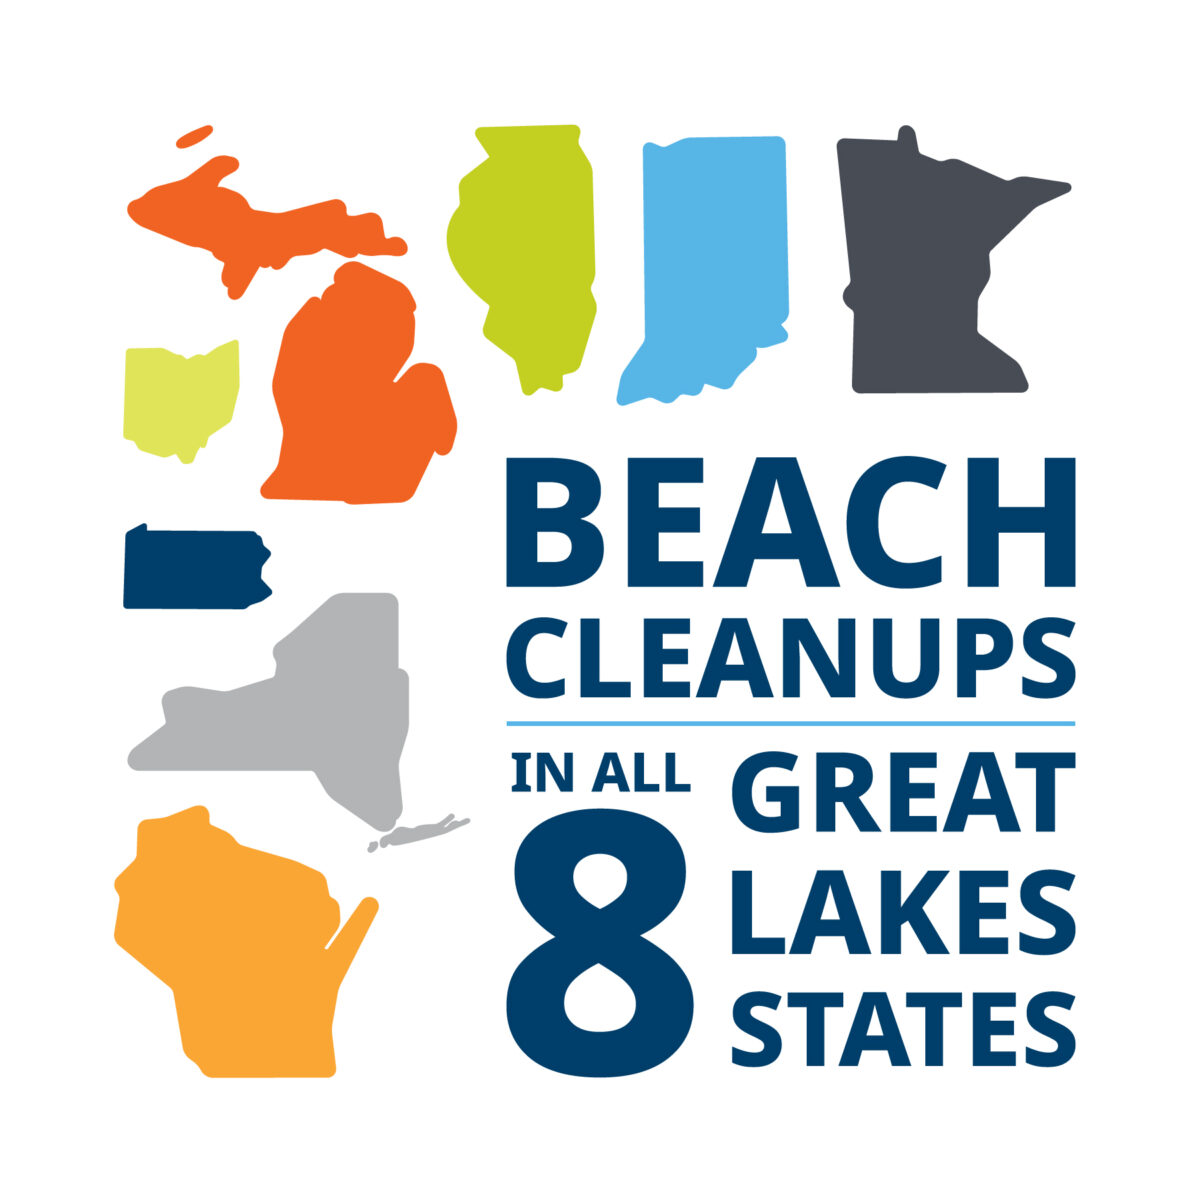 Beach cleanups in all 8 Great Lakes states.